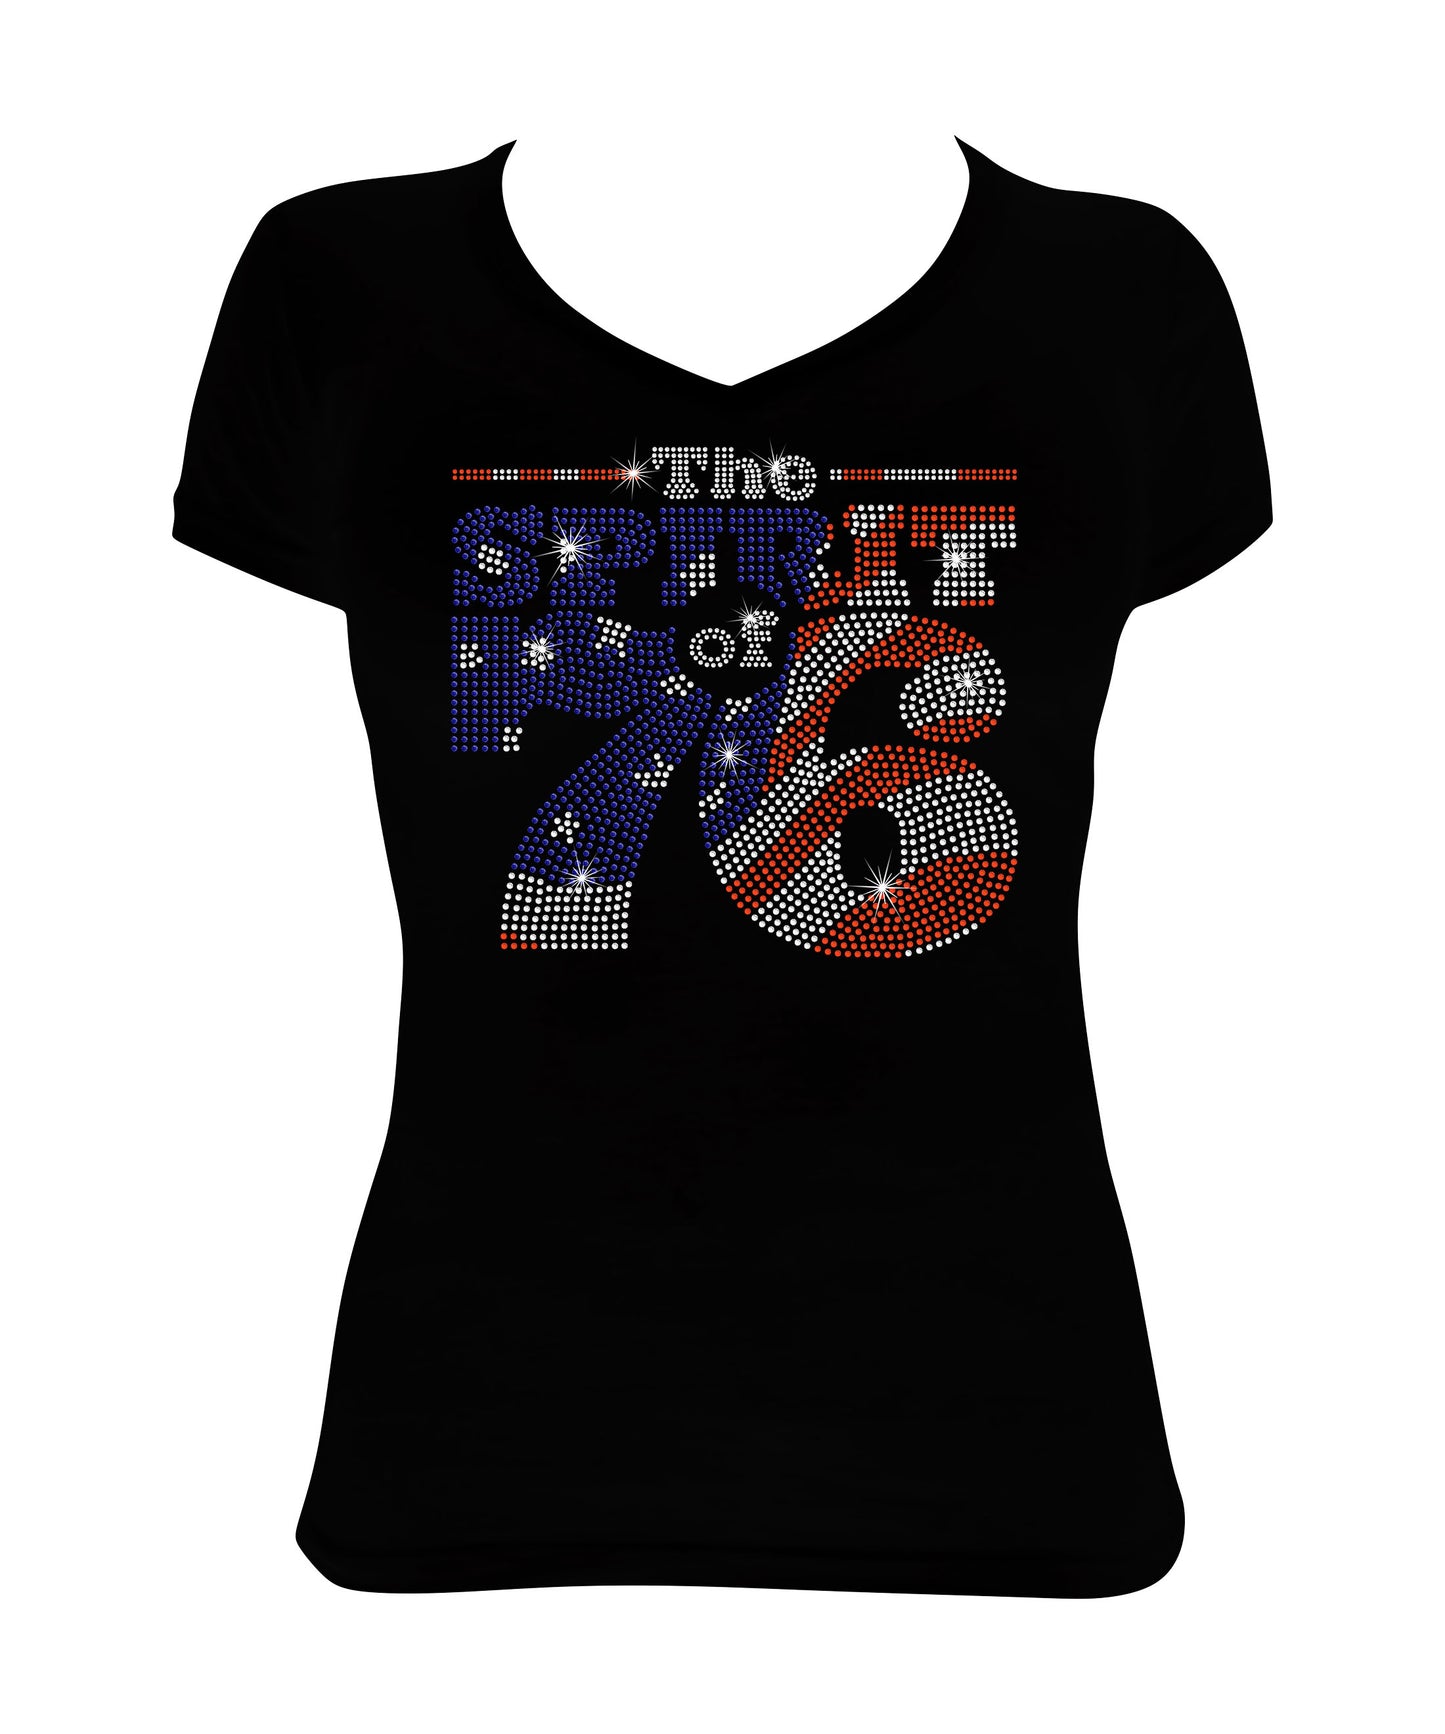 Women's Rhinestone Fitted Tight Snug Shirt The Spirit of 76 in Red, White & Blue, Patriotic Shirt, 4th of July Shirt